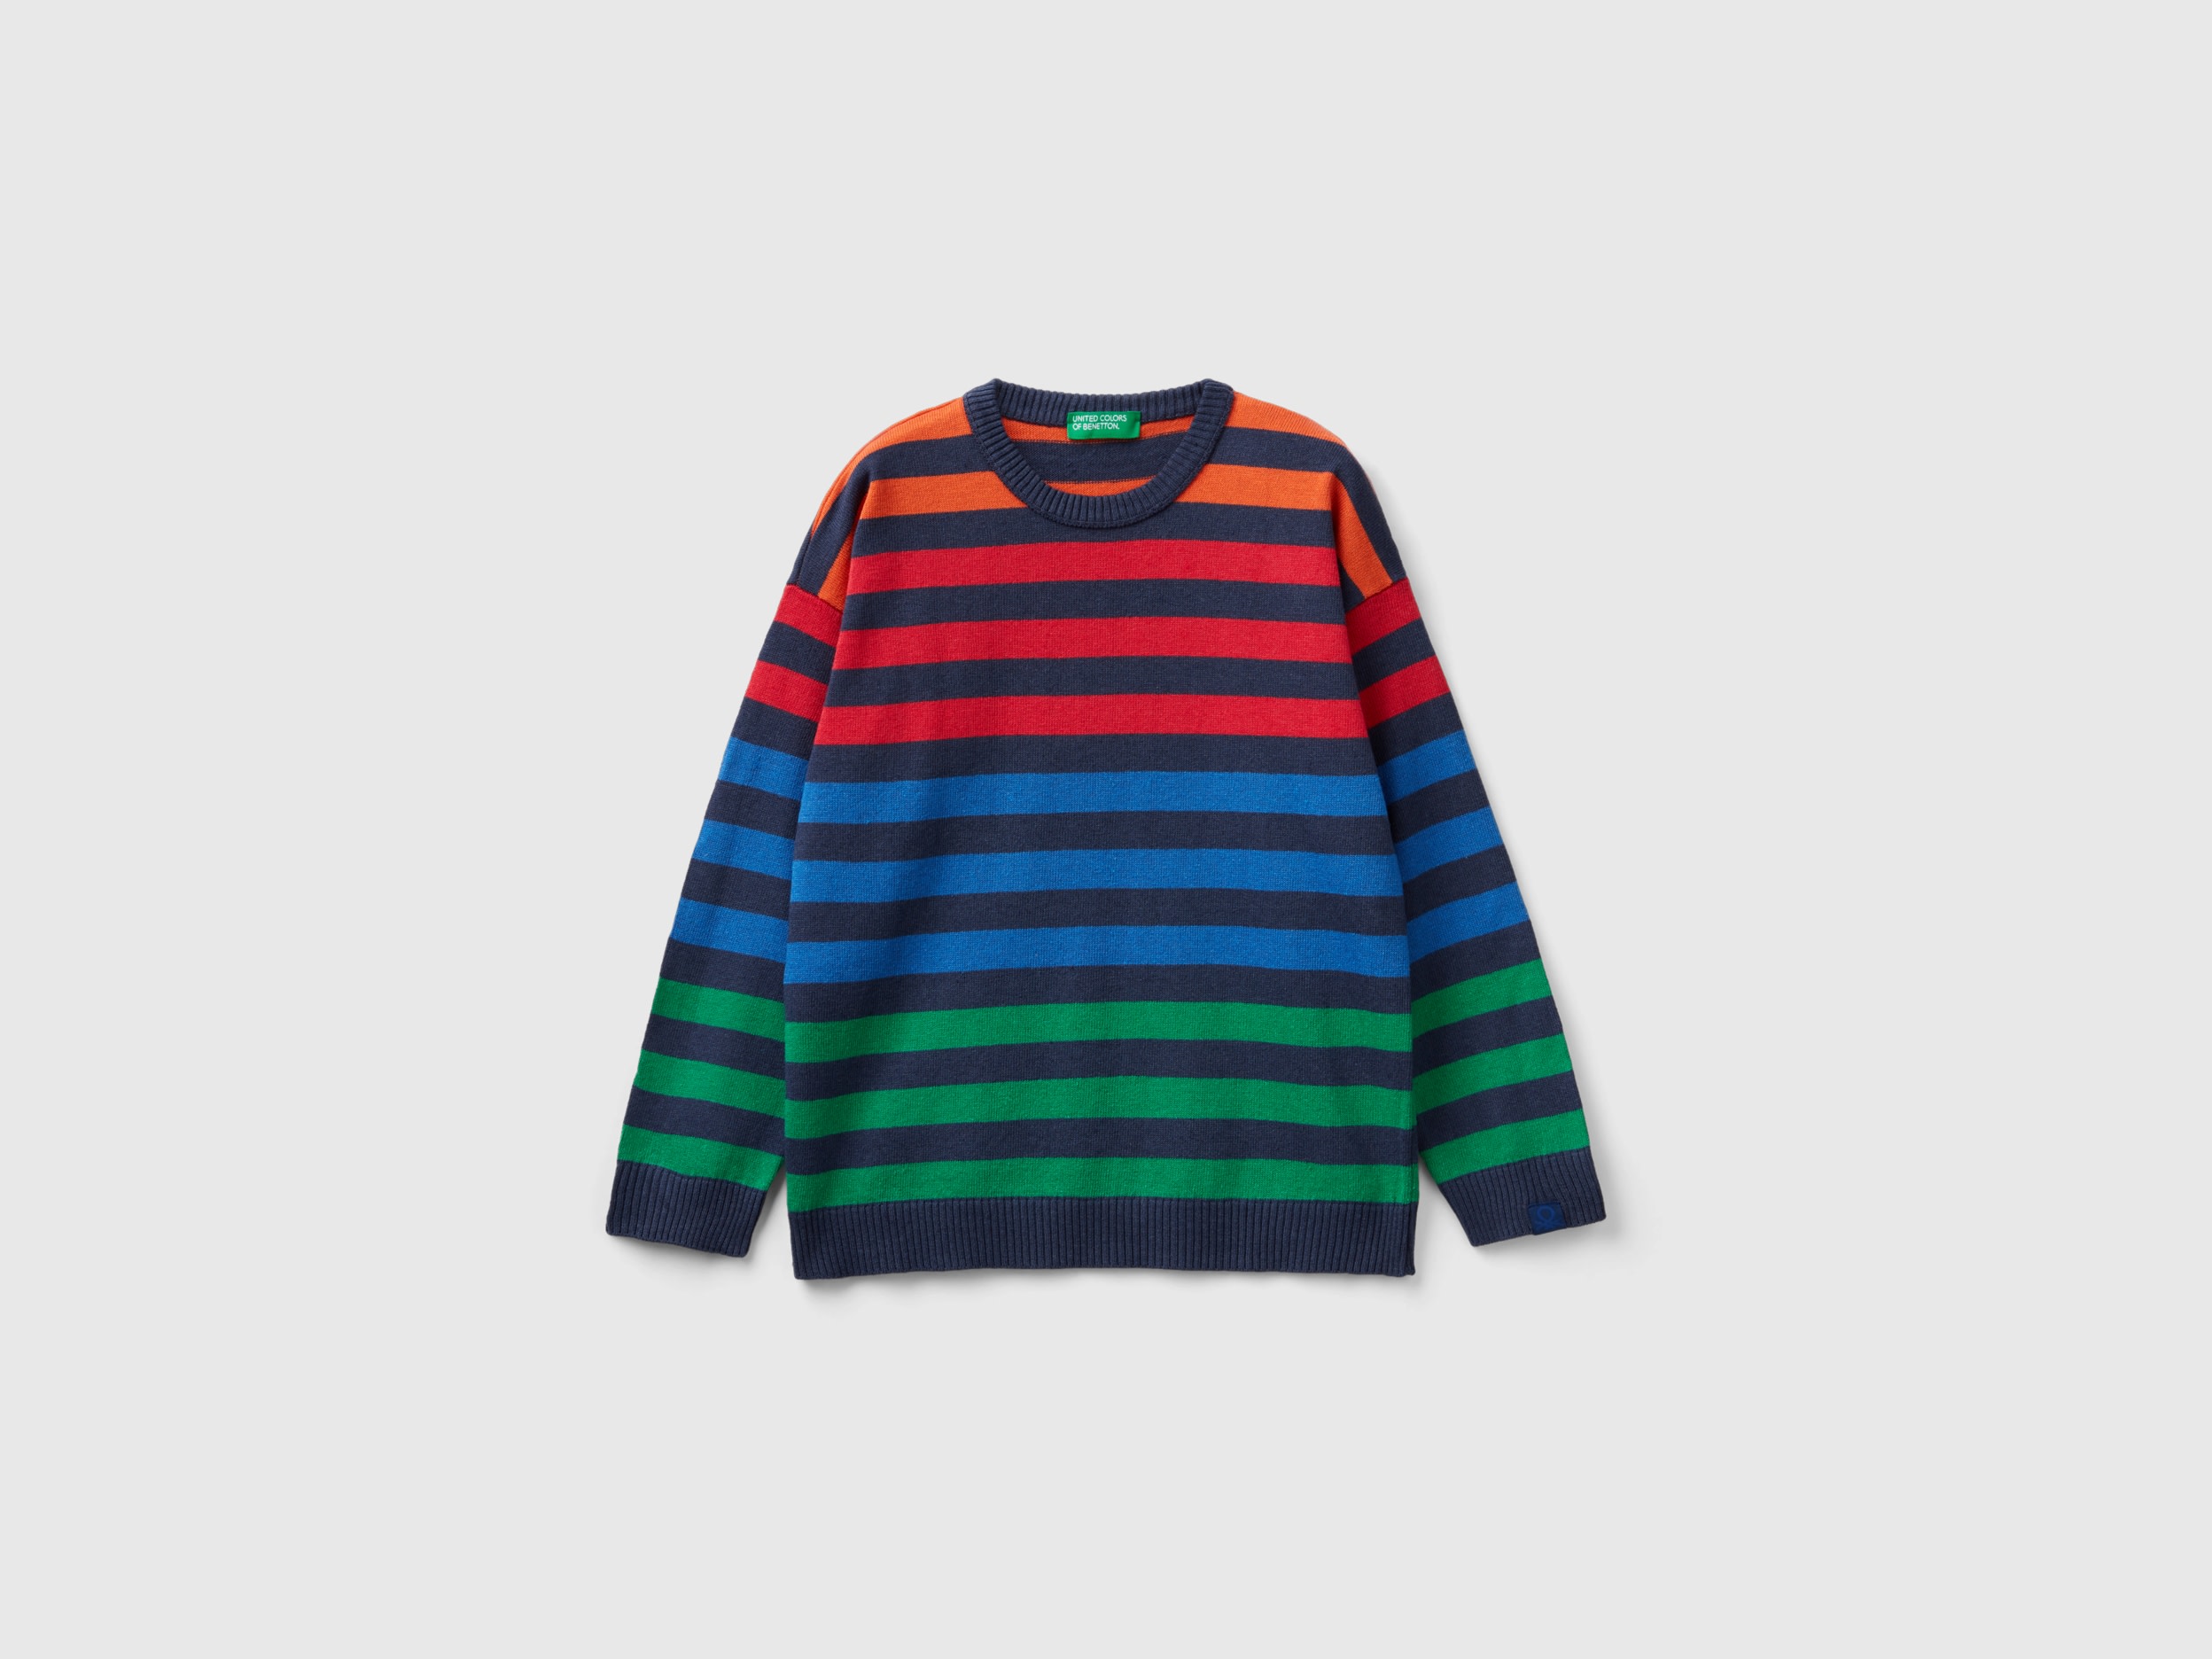 Image of Benetton, Striped Sweater, size 3XL, Multi-color, Kids